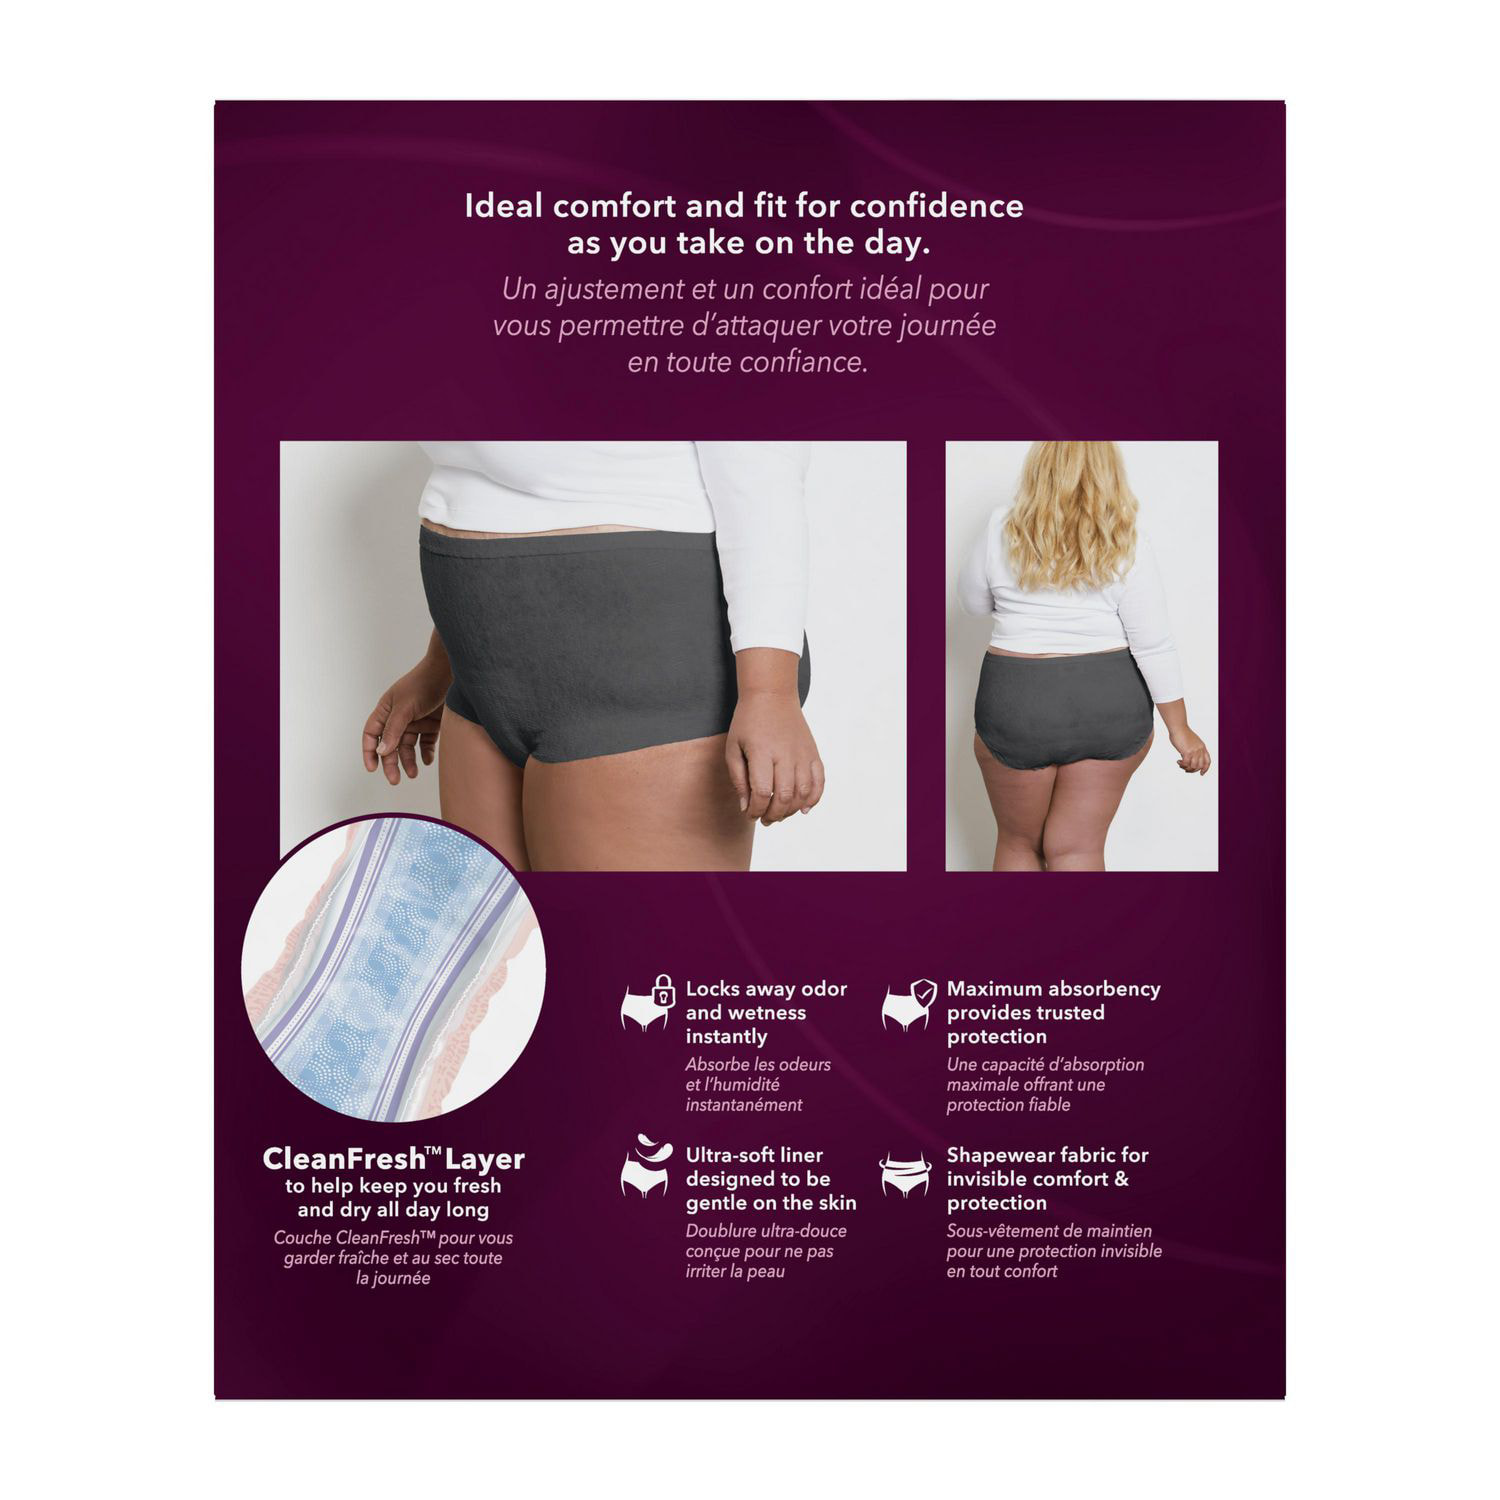 Depend Silhouette Disposable Underwear Female Waistband Style X-Large,  54219, 18 Ct, 18 ct - Ralphs